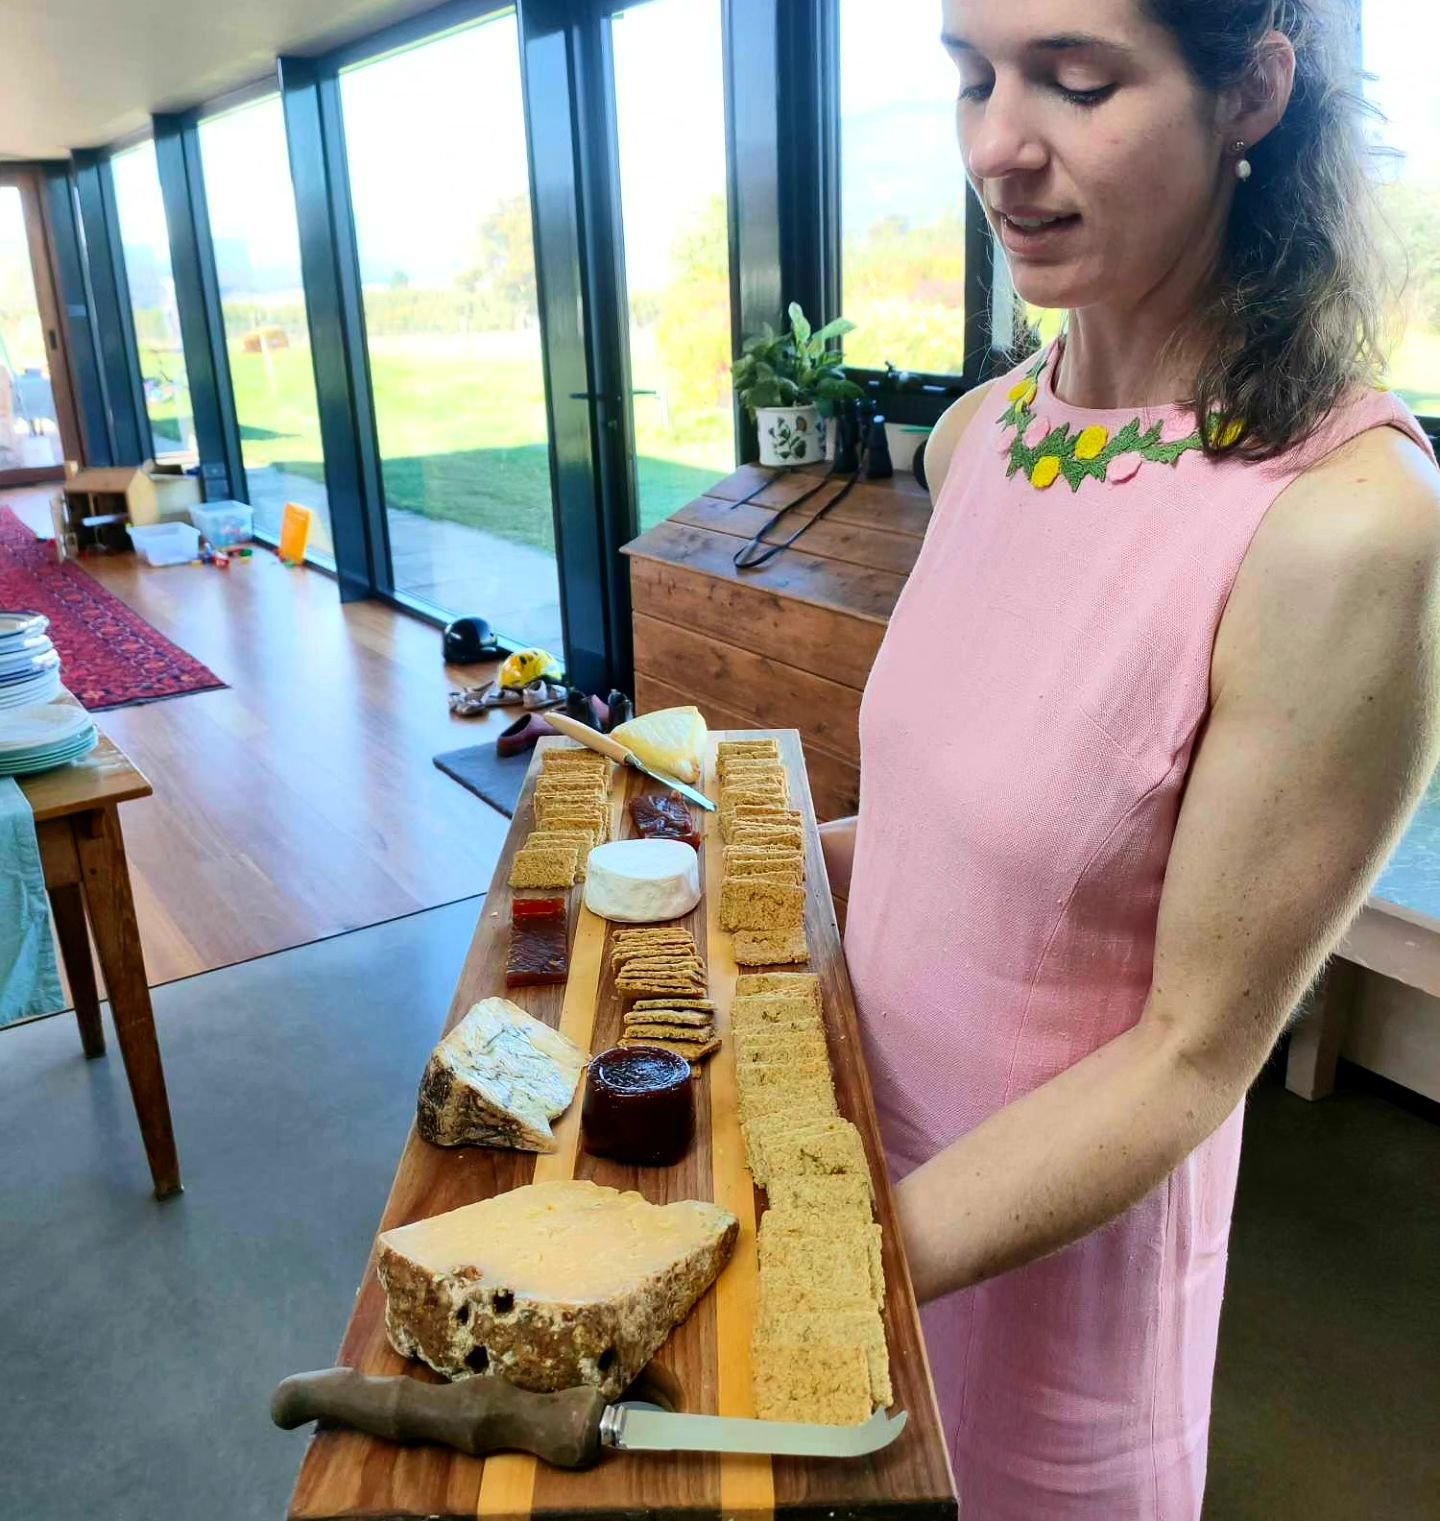 When you love cheese and oatcakes as much as we do, you serve it by the metre #shelduckfarm 
.
.
Ft. Special dress find from @vivavintage.com.au 
#autumn #platter #cheese #oatcakes